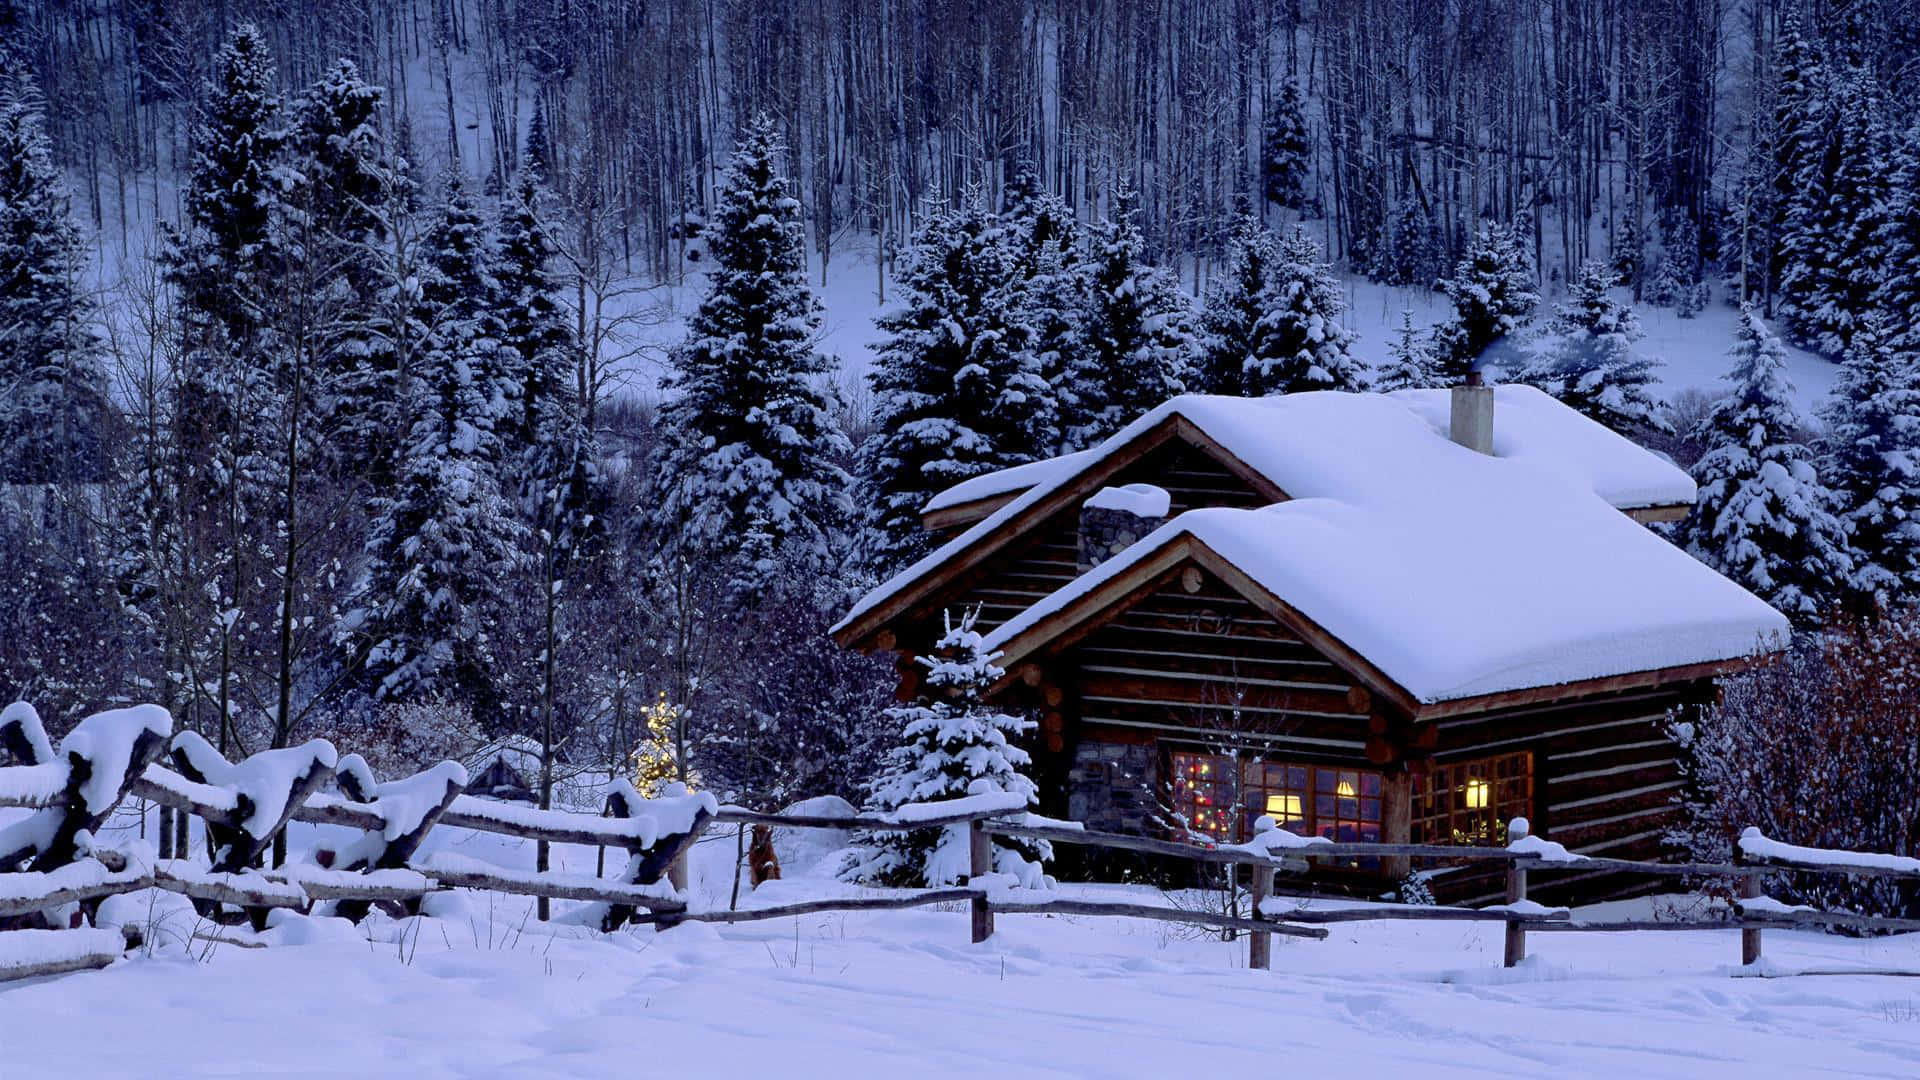 Feel the warmth of winter and enjoy a cozy night by the fire. Wallpaper